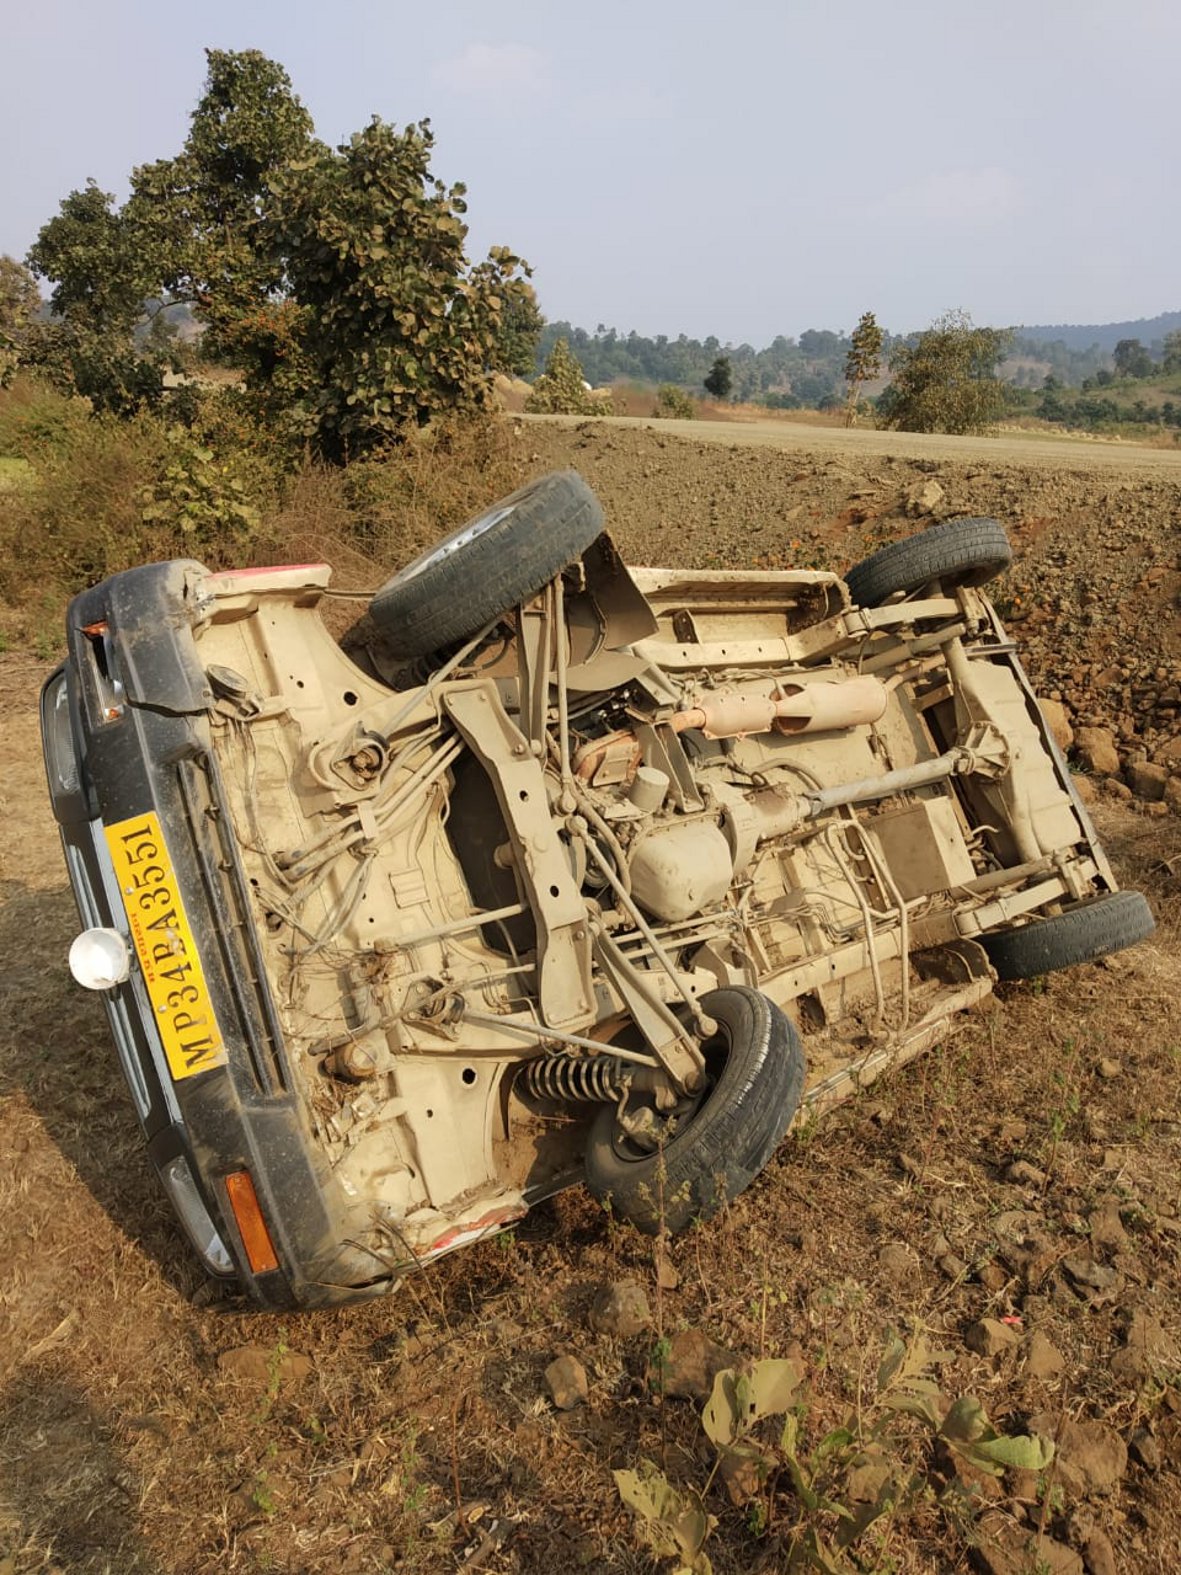 Road accident: Janani Express overturns, driver dies